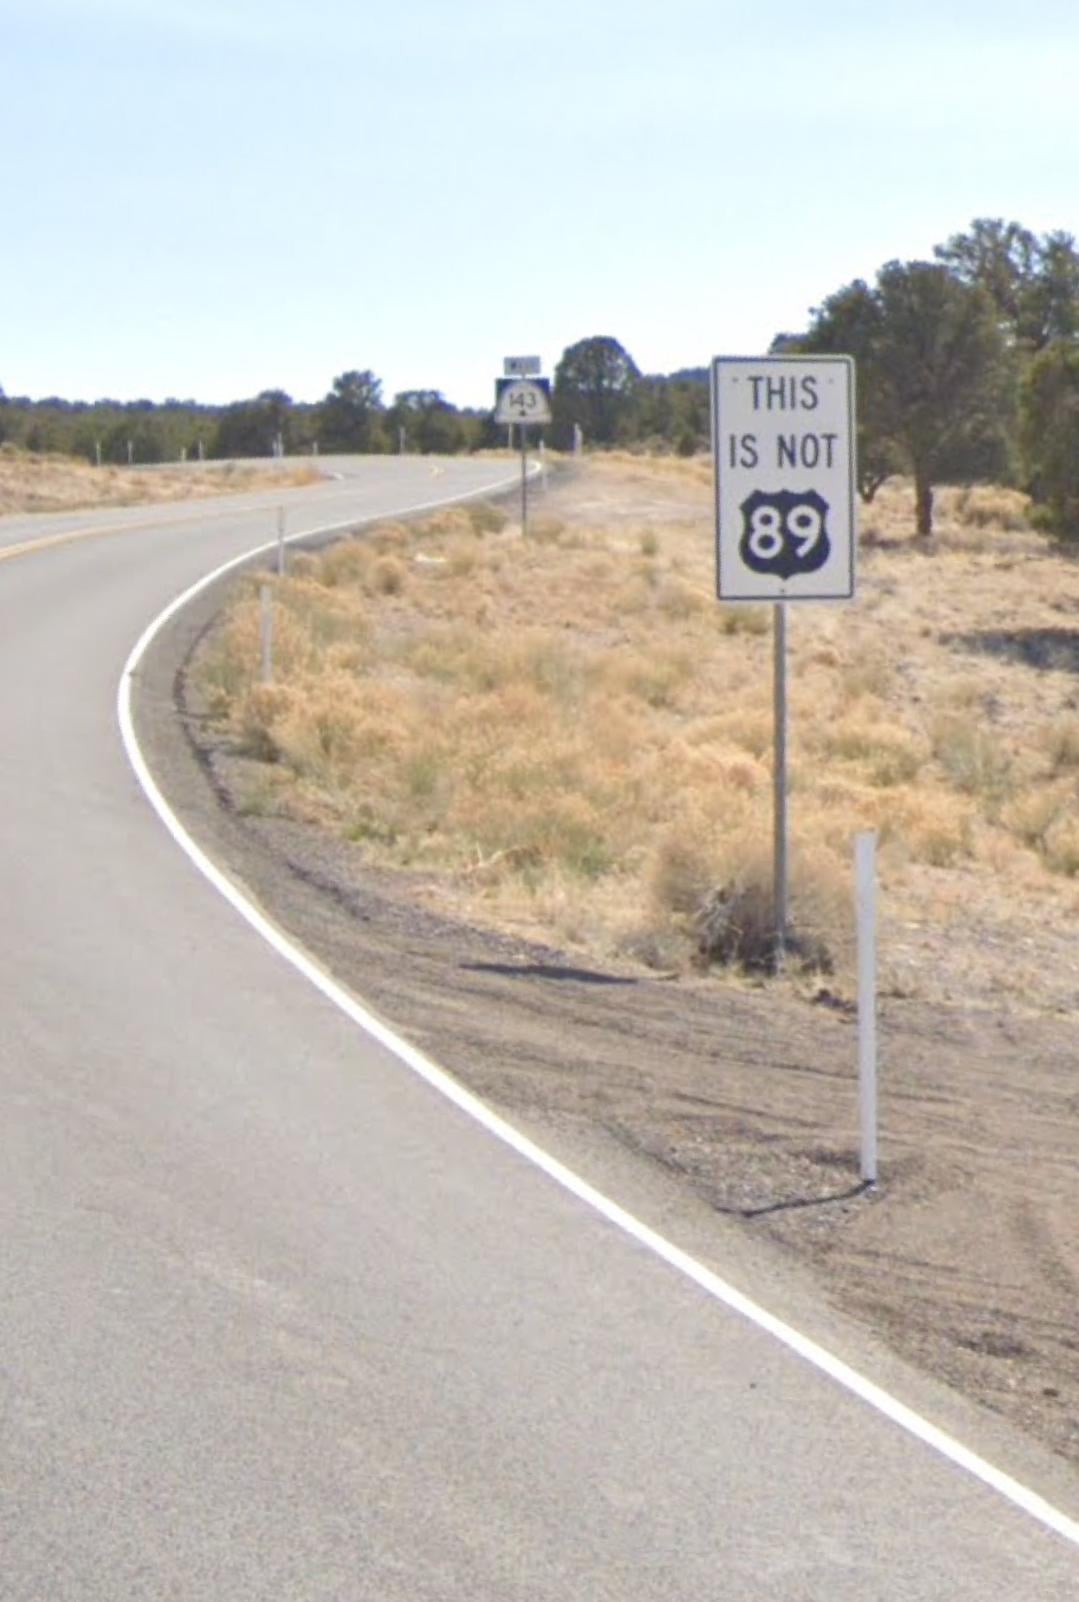 this-highway-sign-lets-you-know-what-highway-you-are-not-on-v0-is7r0e4mjglc1.jpeg